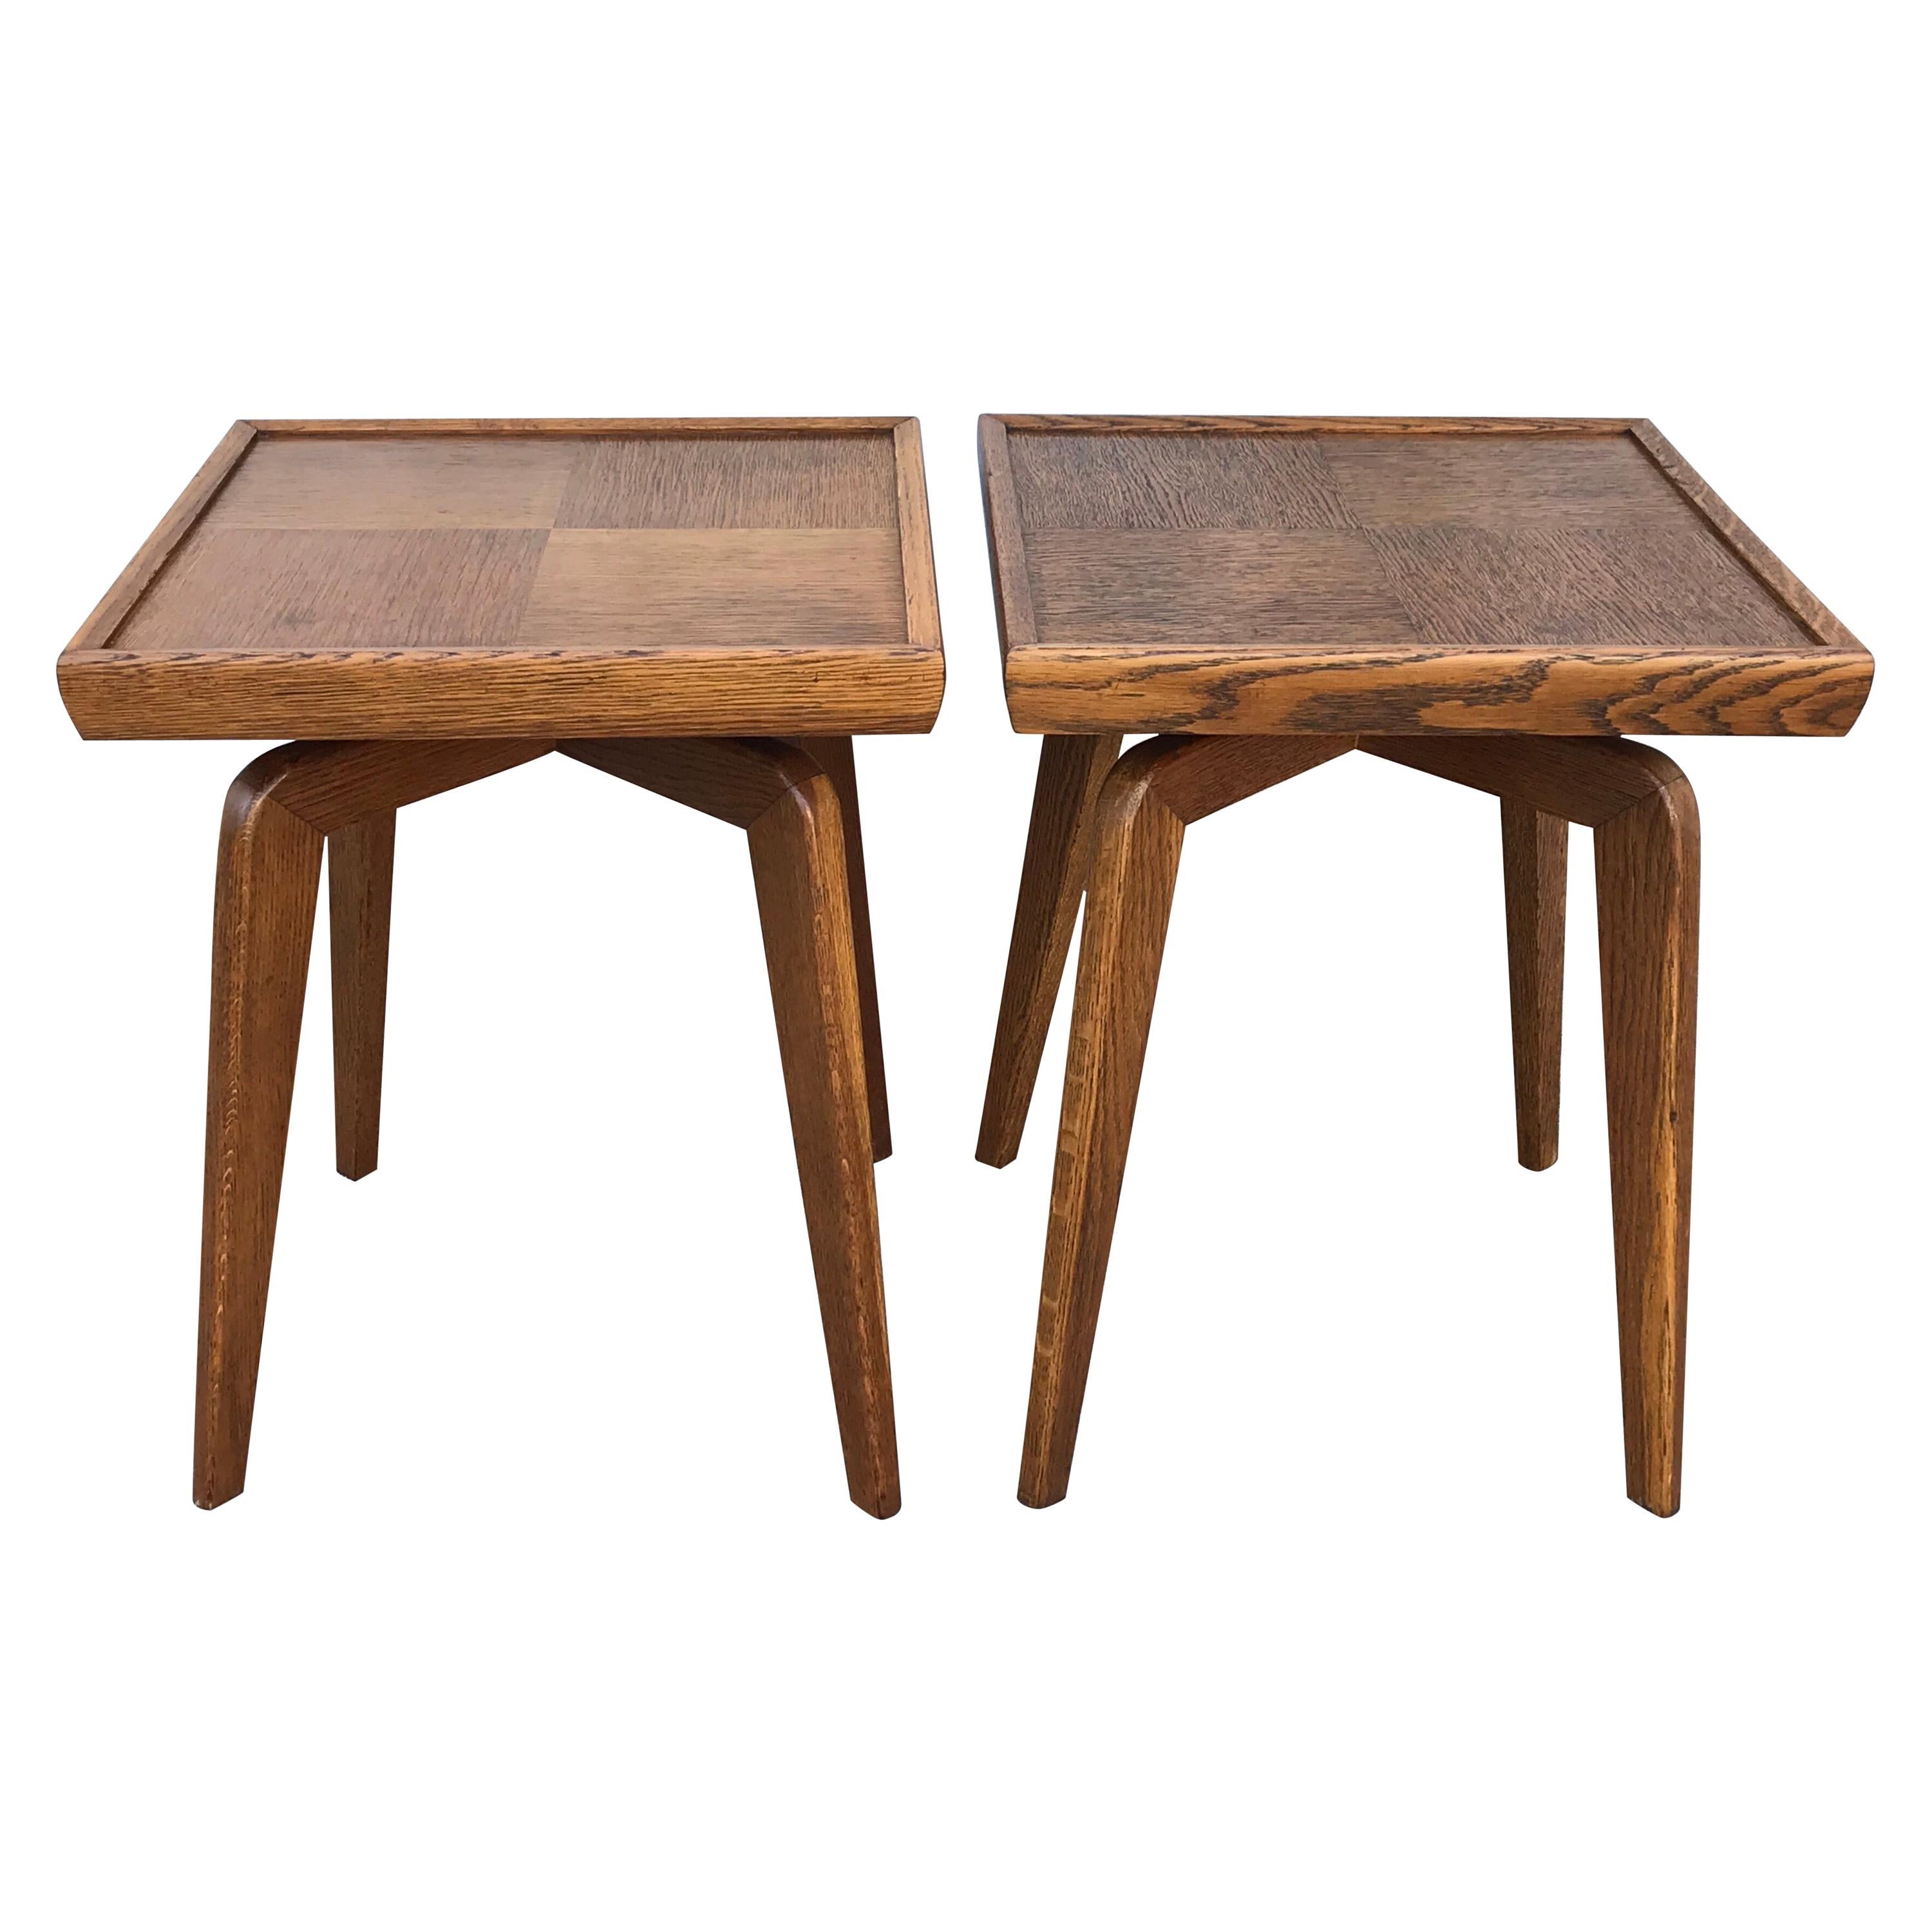 Pair of Mid-Century Modern French Red Oak Side Tables Attributed to Jean Prouve